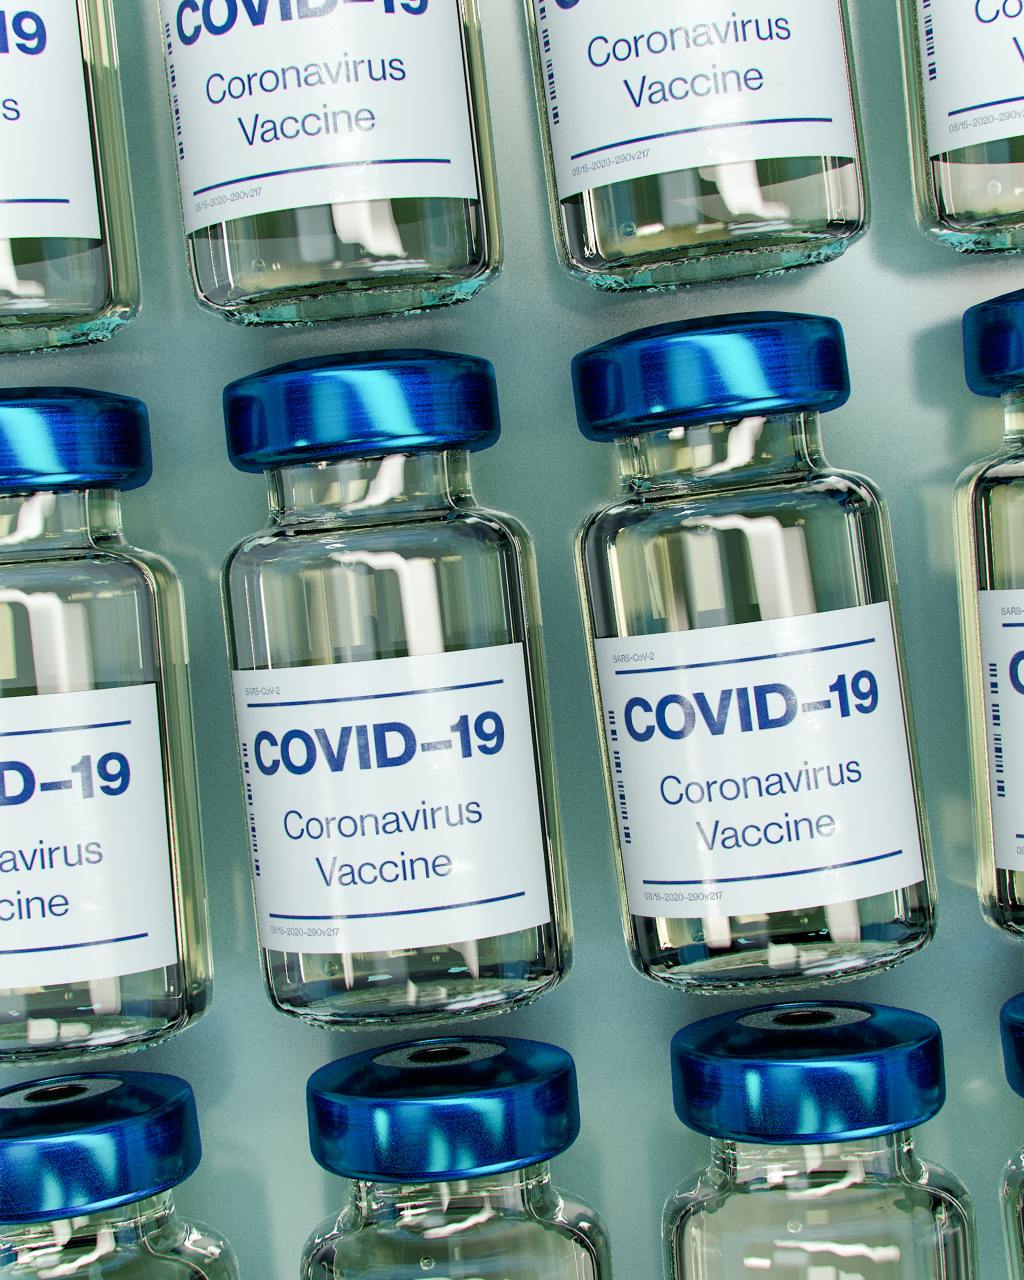 In case you’ve been Googling COVID-19 VACCINE SIDE EFFECTS: Yes, the vaccine is going to cause your immune related issues to flare (psoriasis, IC, fibromyalgia, neuropathy, etc.)